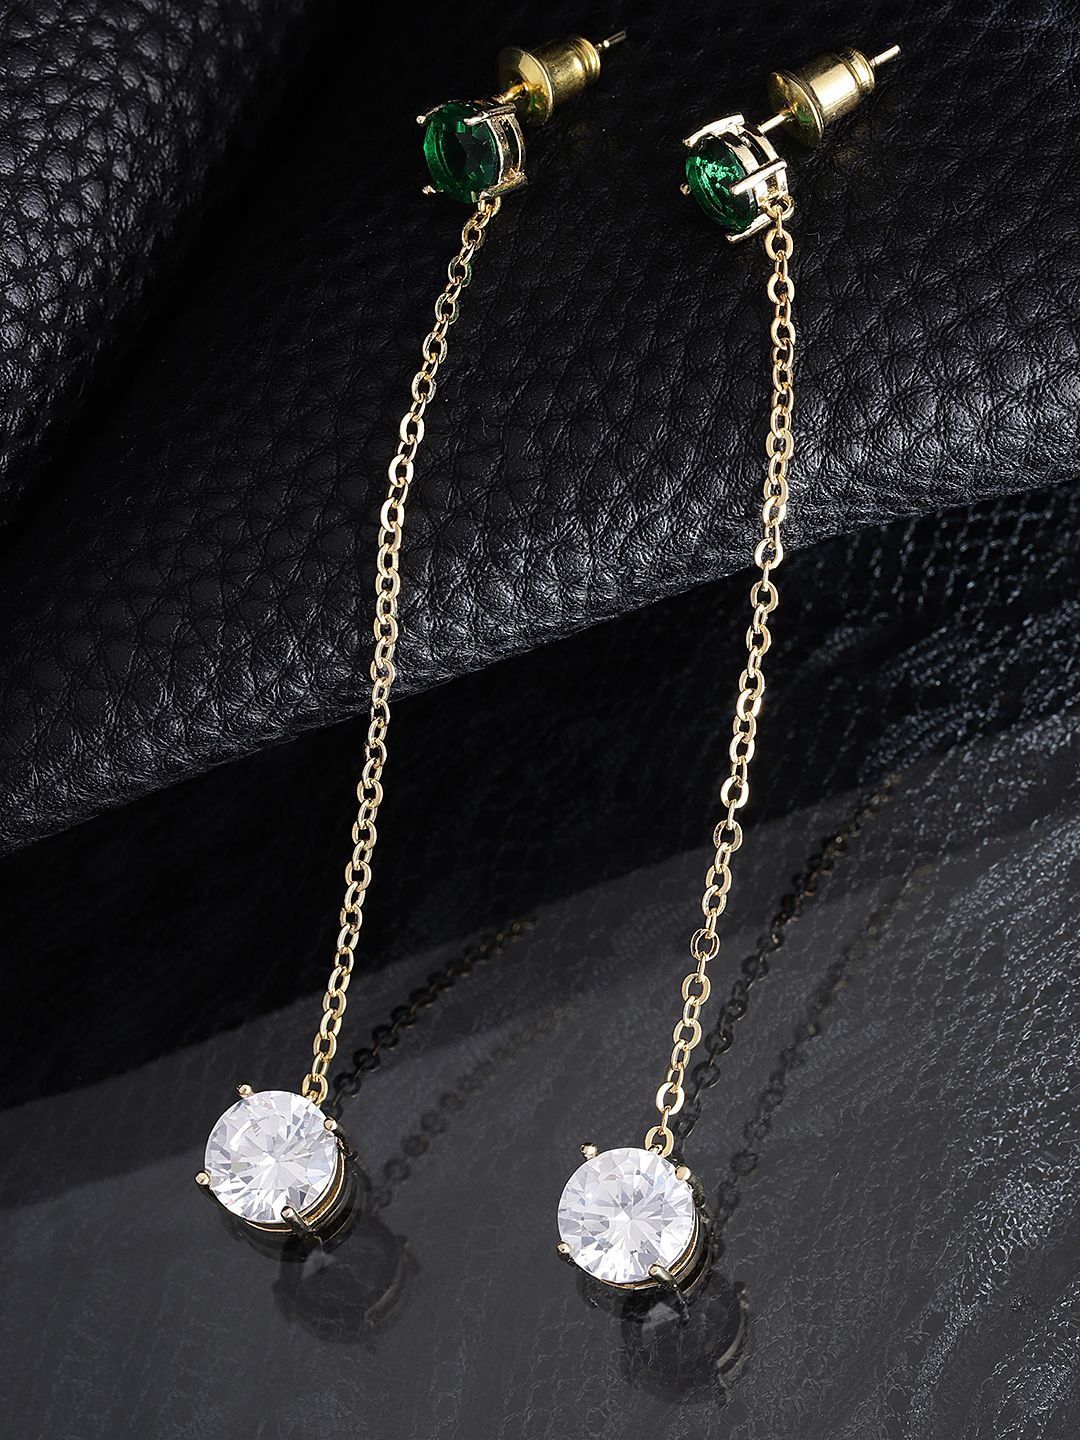 Carlton London Green Gold-Plated CZ-Studded Contemporary Drop Earrings Price in India